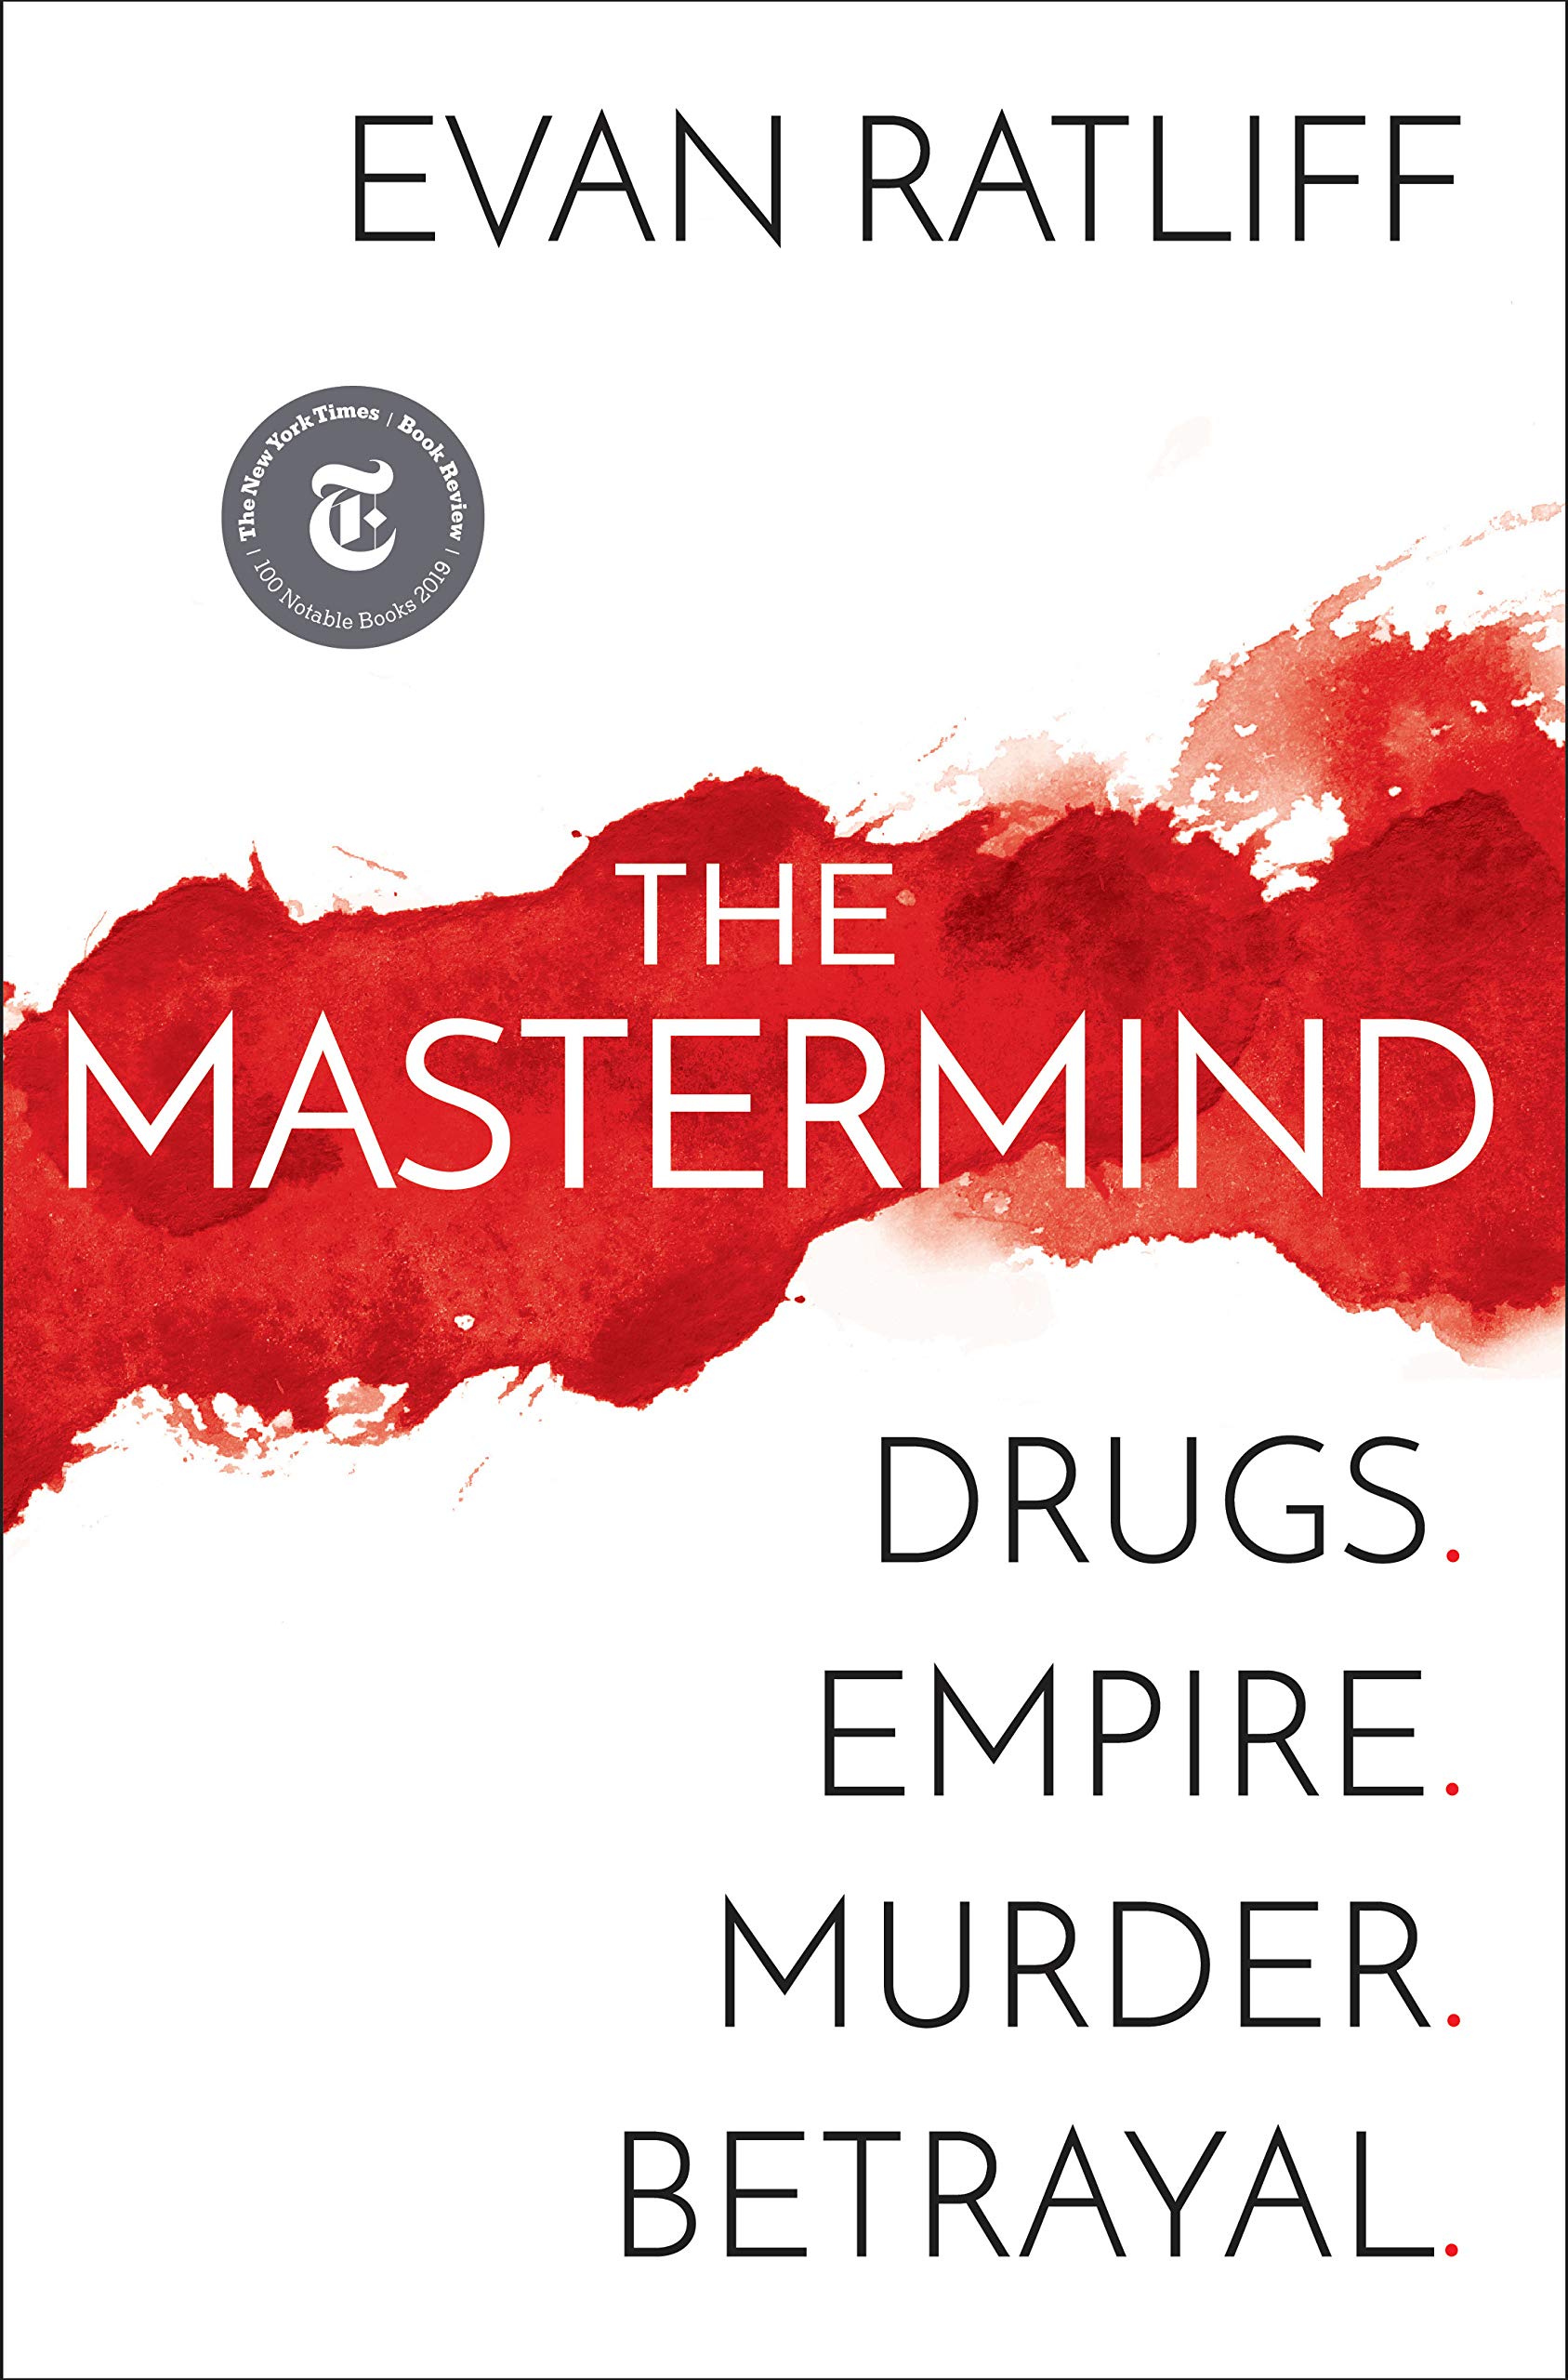 The cover of The Mastermind